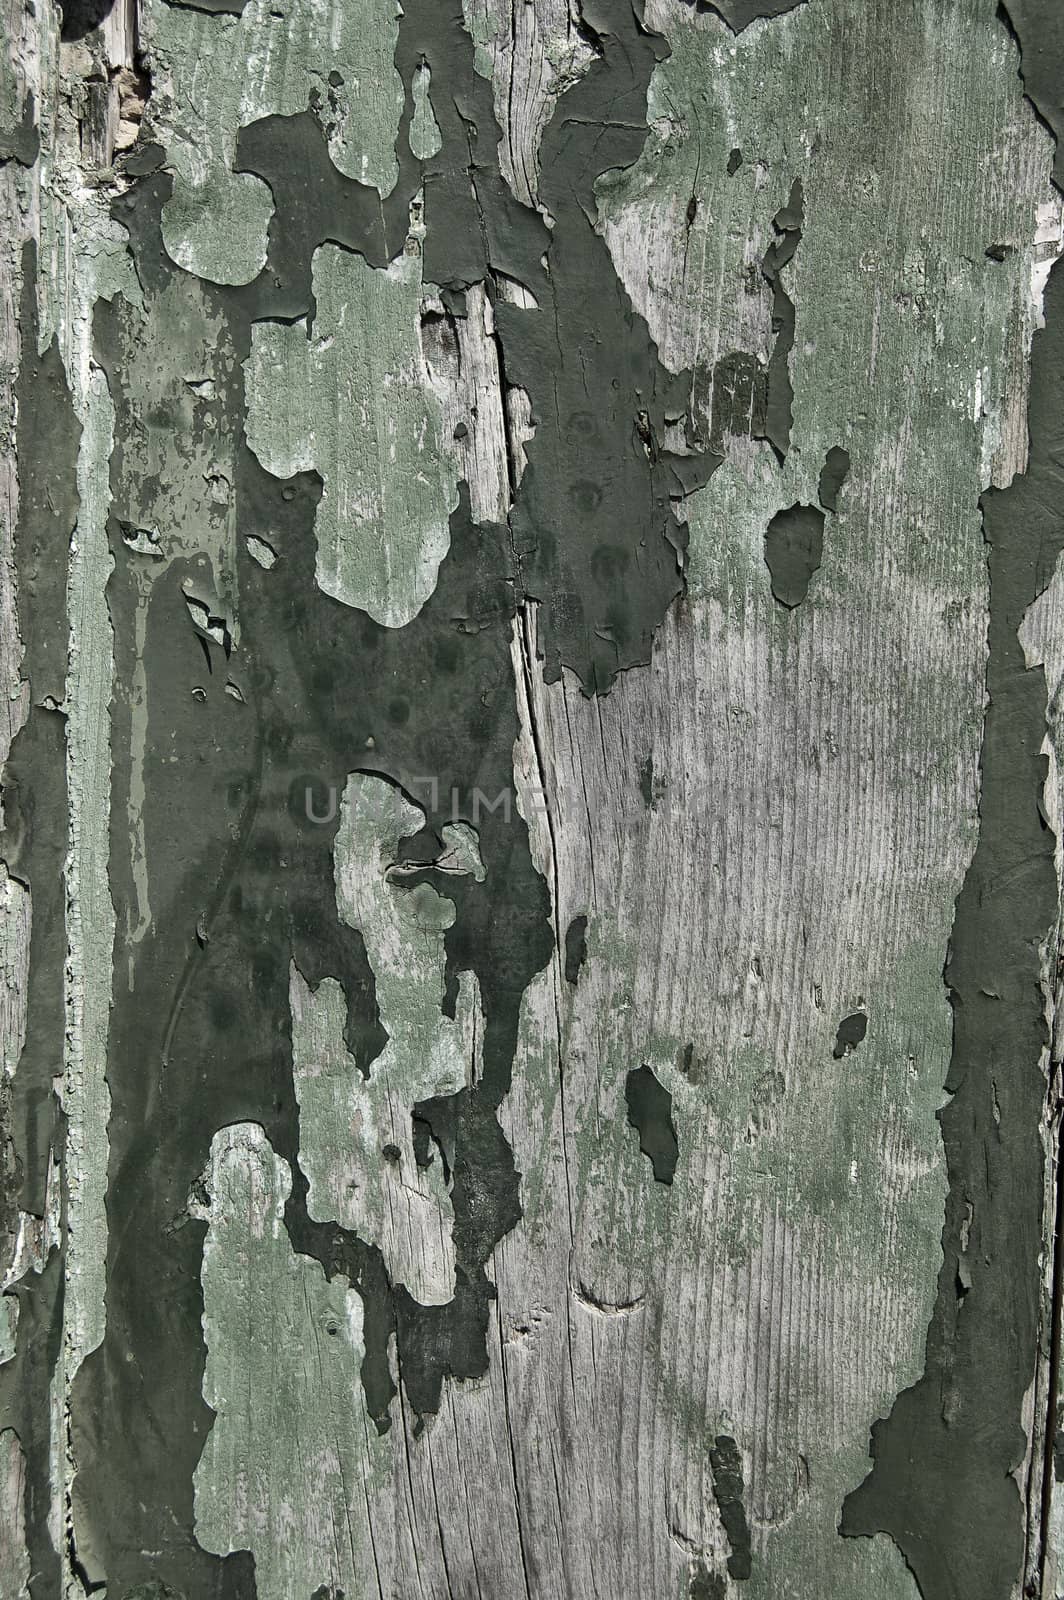 Cracked wood by cla78